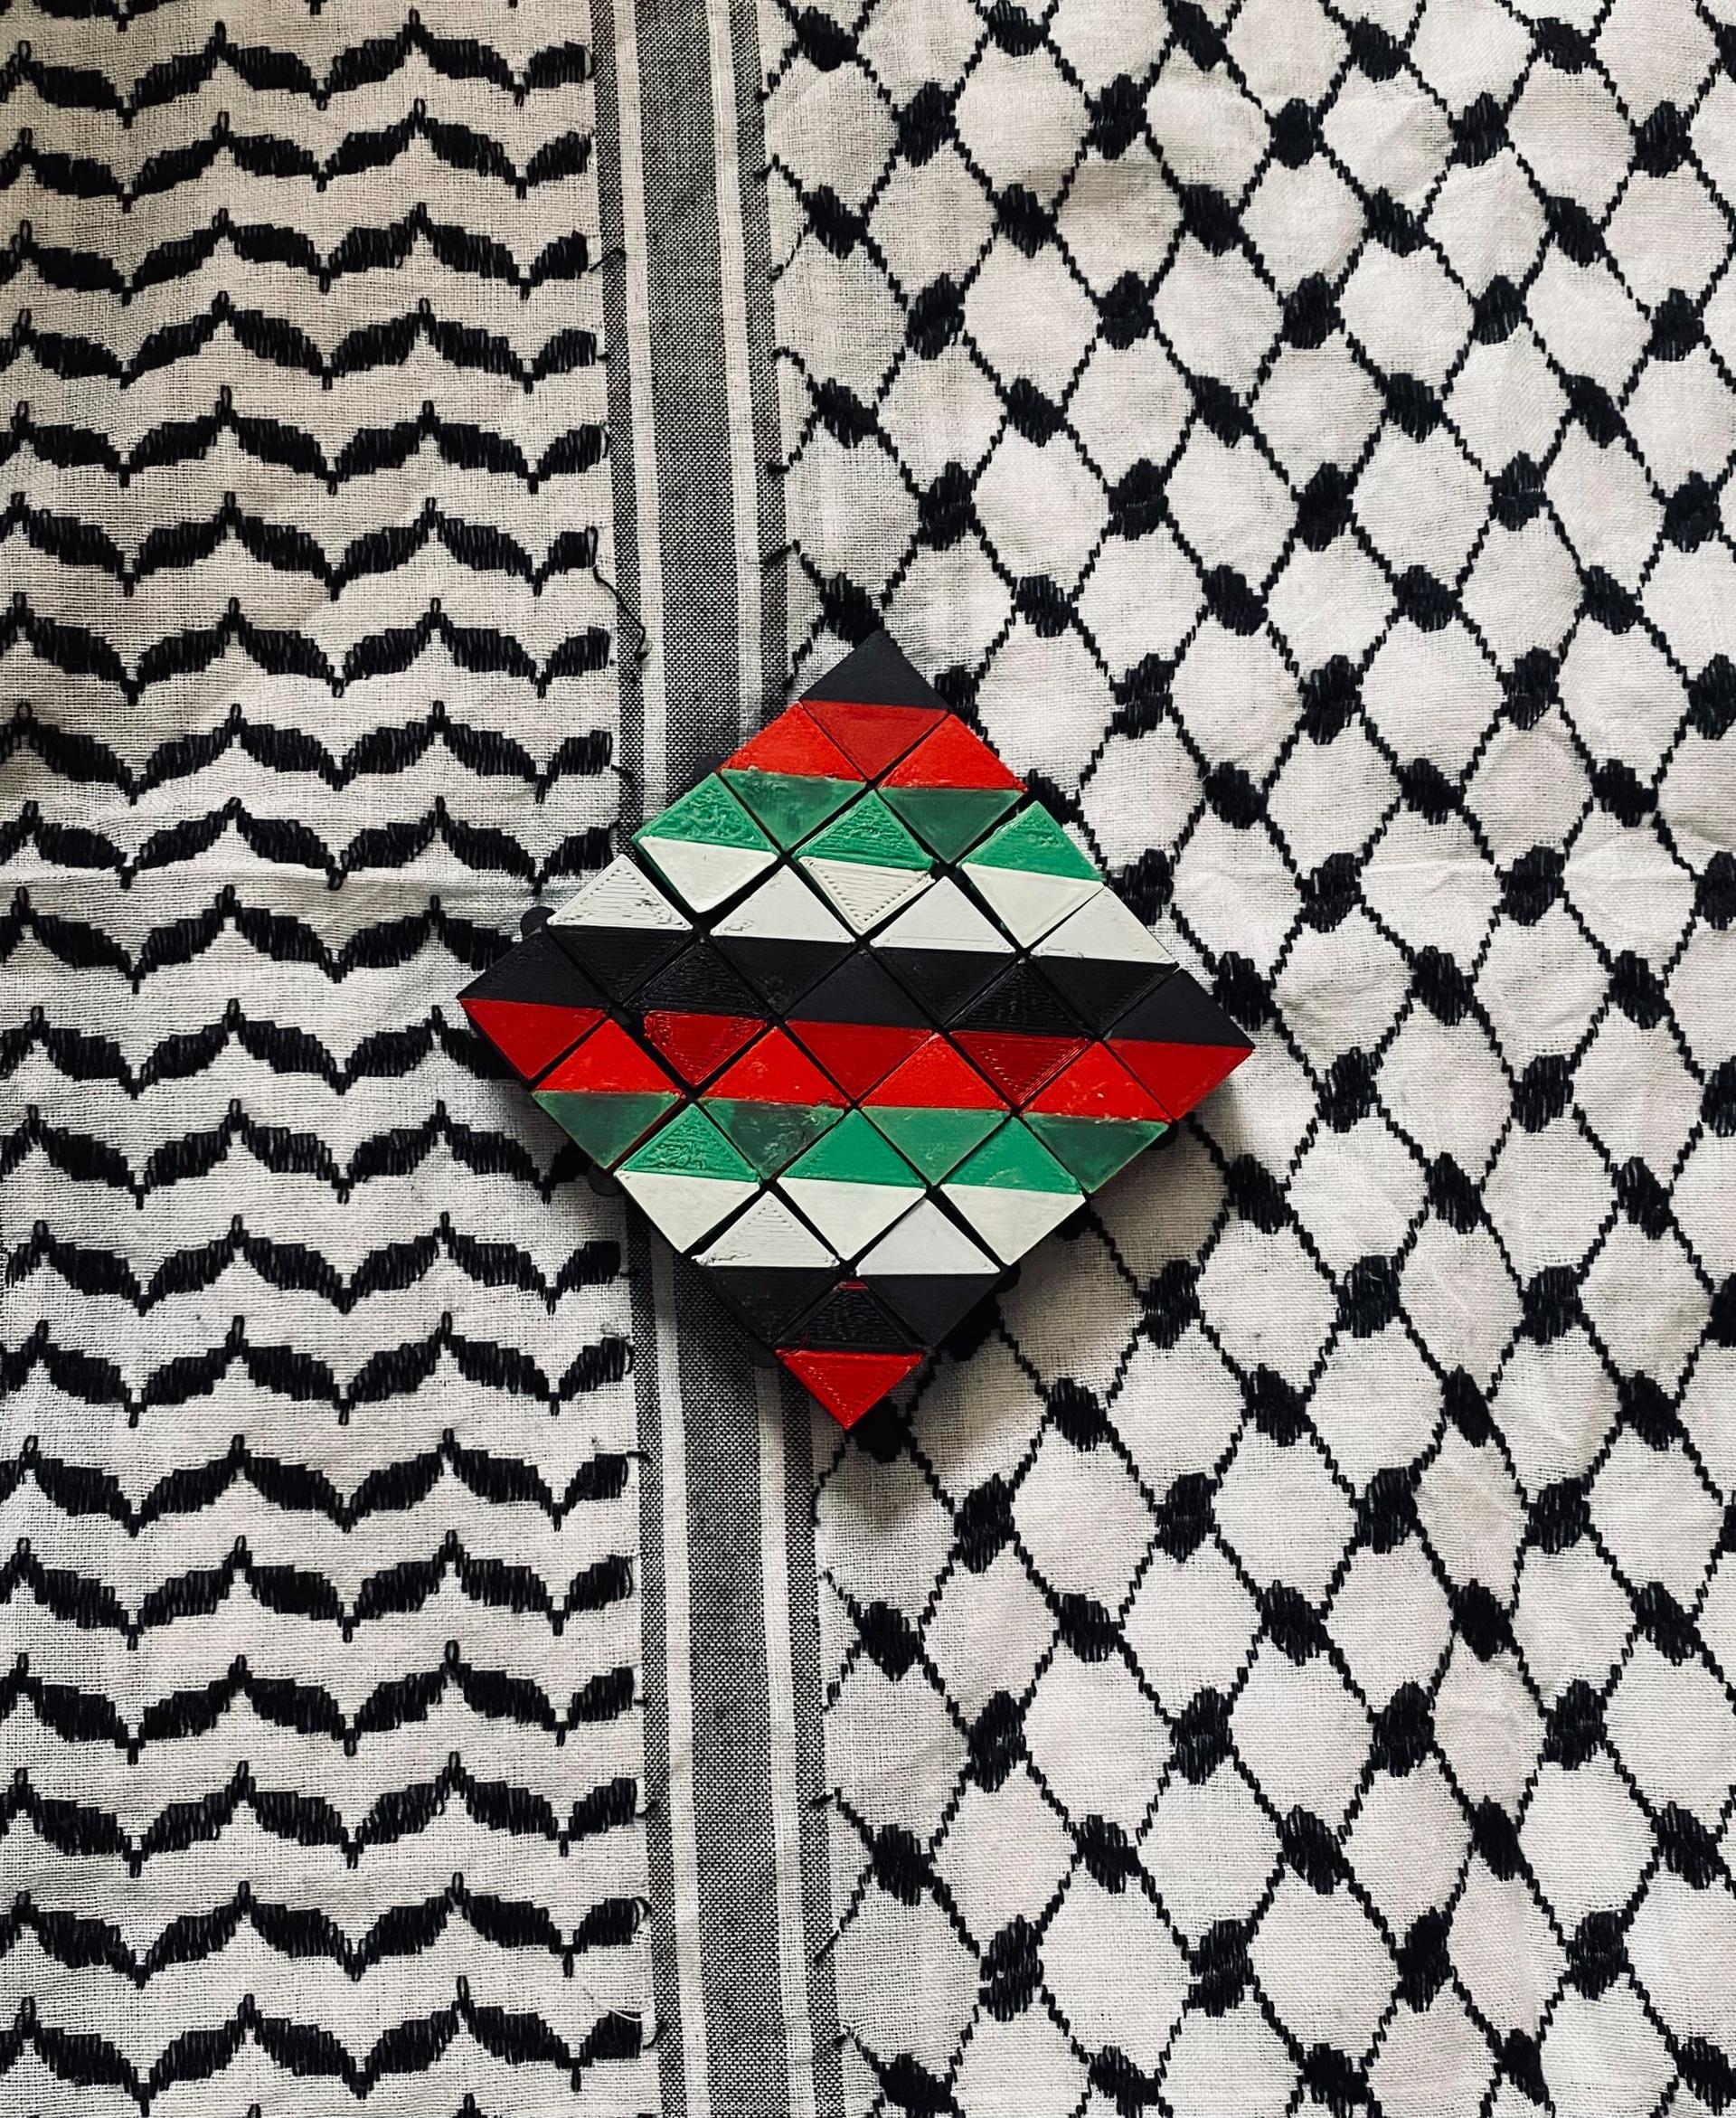 Auxetic Tile // 18mm Diagonal Split - This was made with the colors of the Palestinian flag. Made using Overture PLA & PETG.

Free Palestine! - 3d model